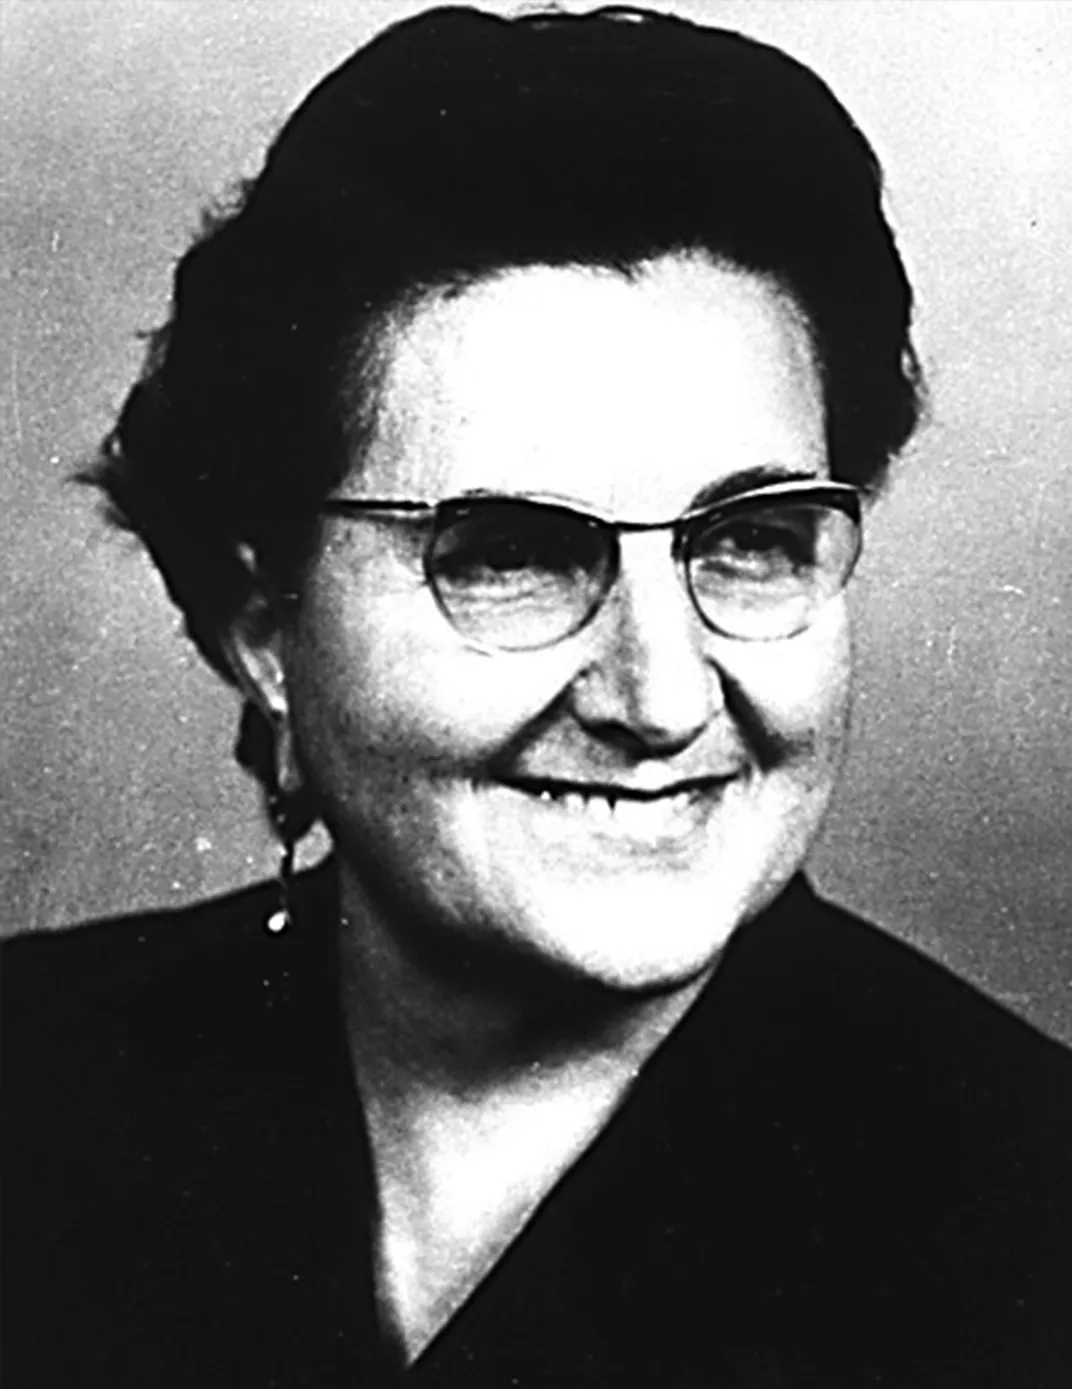 Gertrud Riegel, wife of Hans Riegel Sr. and Haribo's first employee